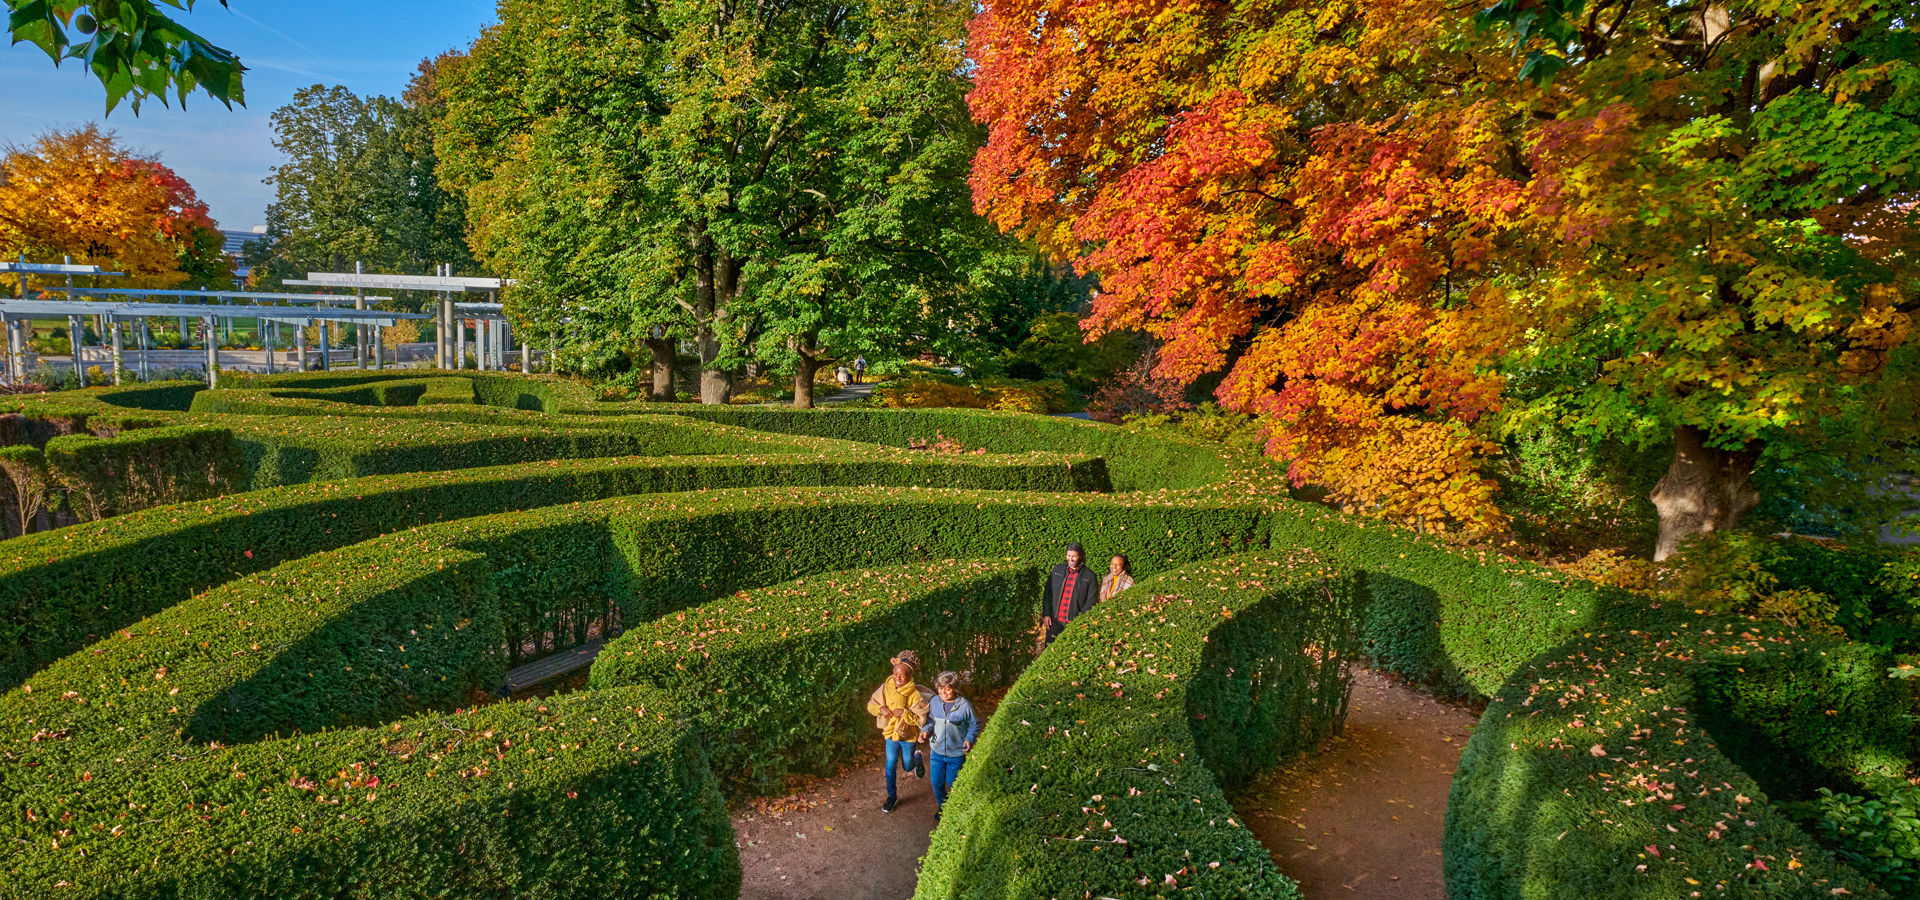 A family explores the maze garden among the bright orange fall leaves